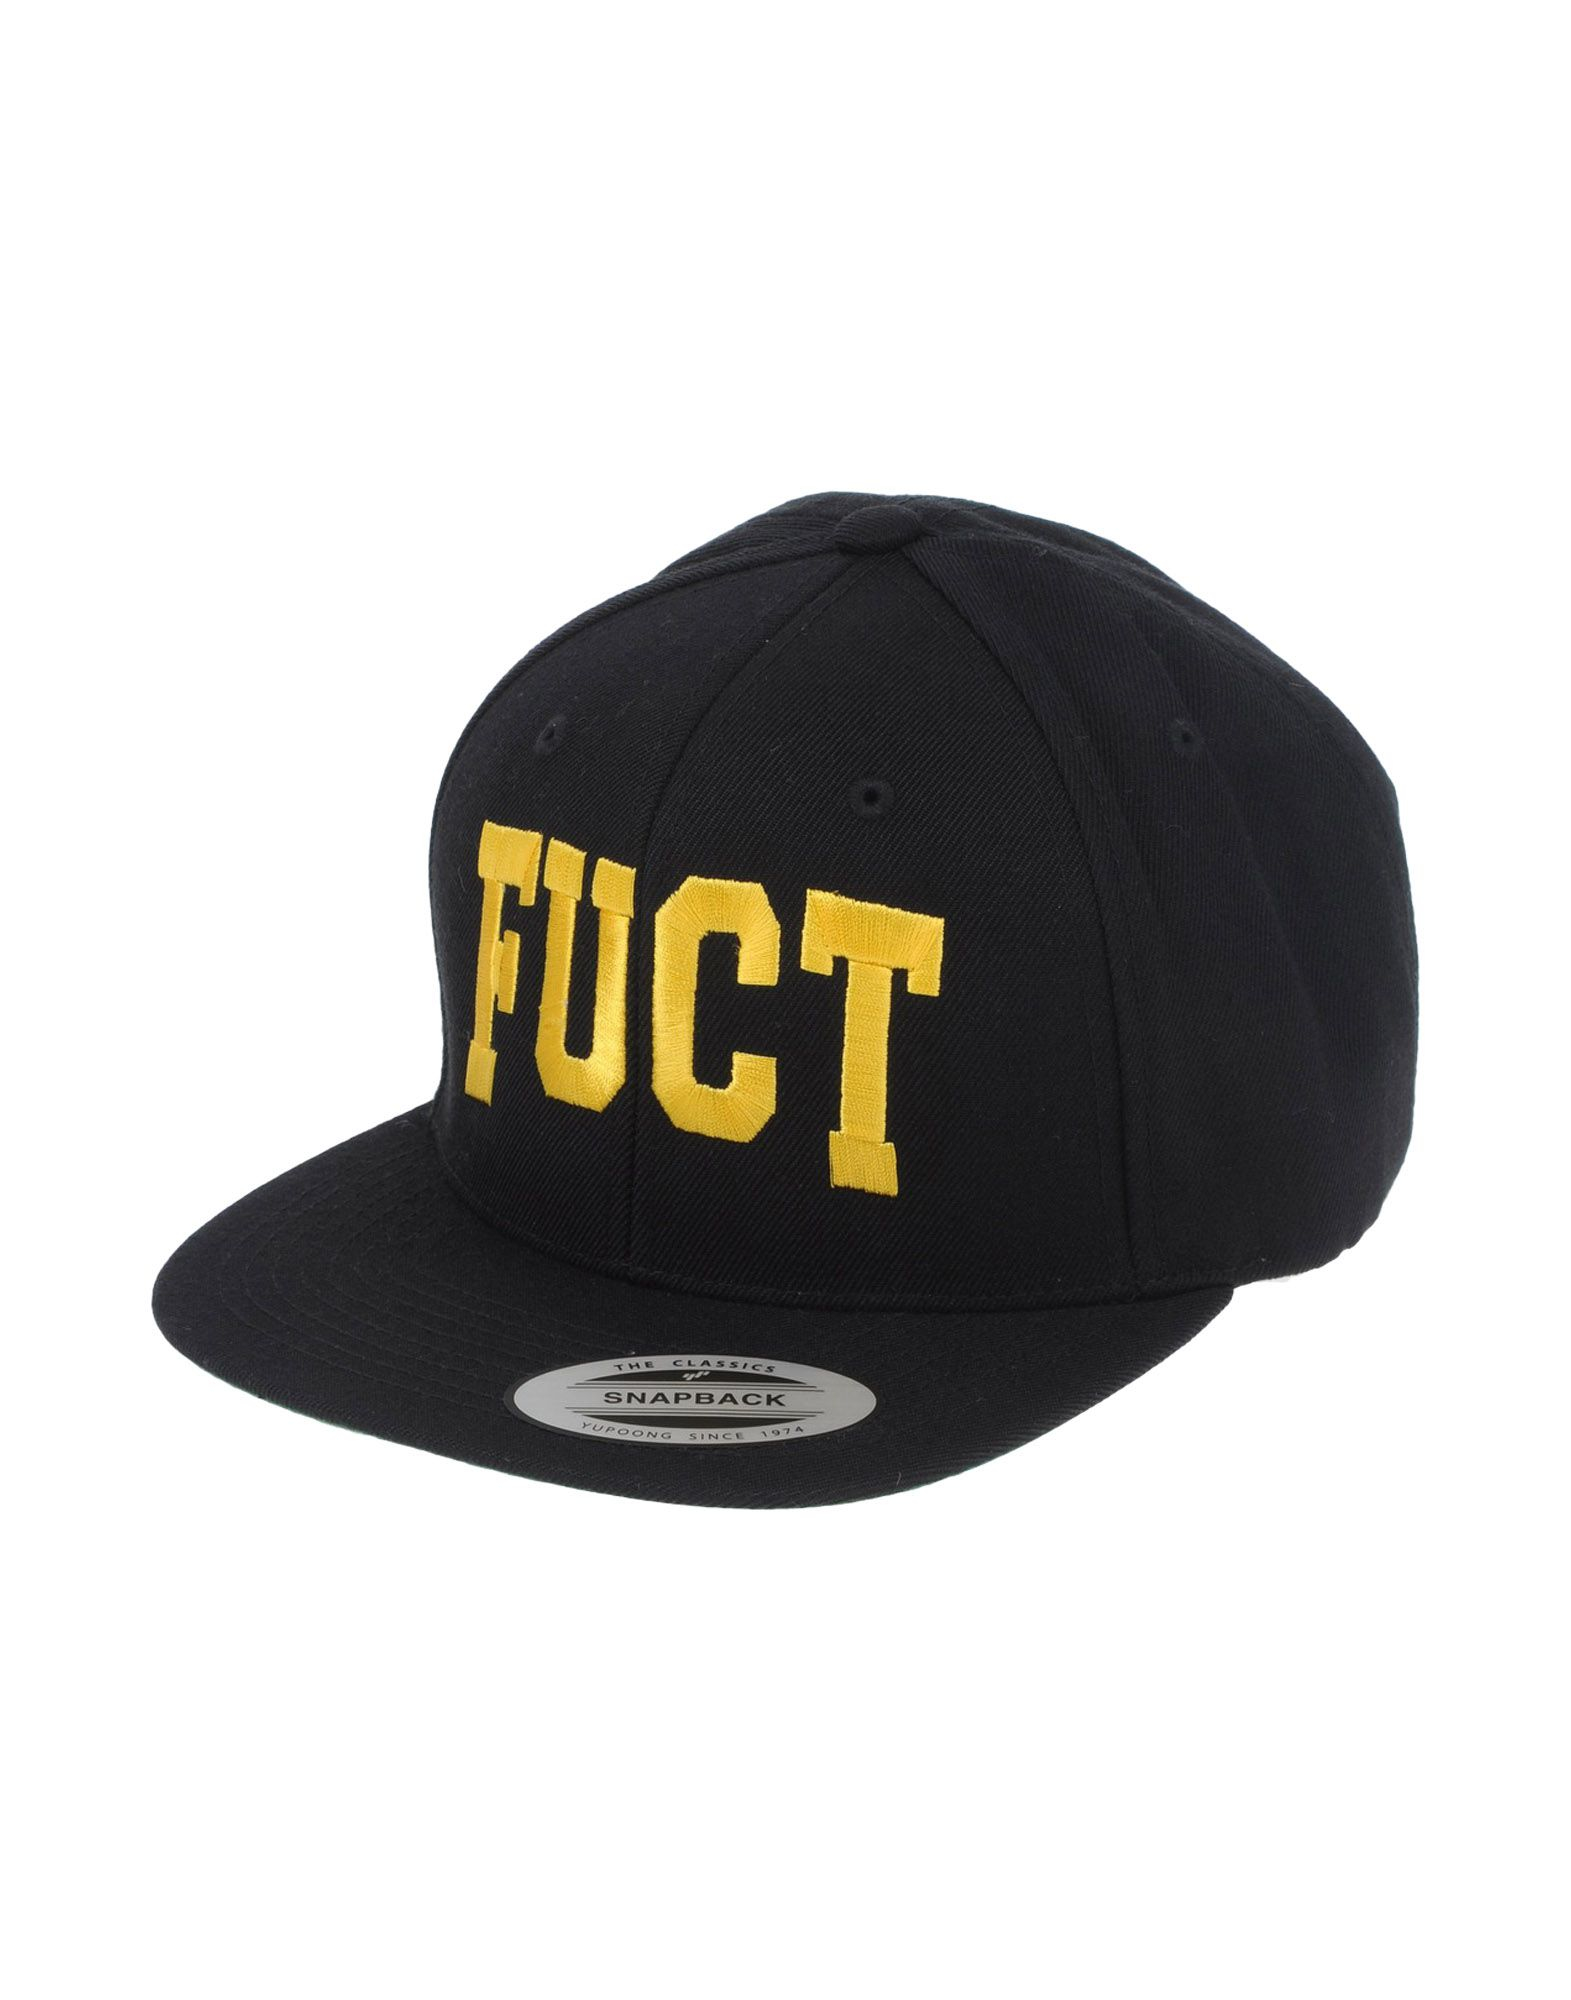 Initially architect factor fuct snapback Outlook Delegate deposit